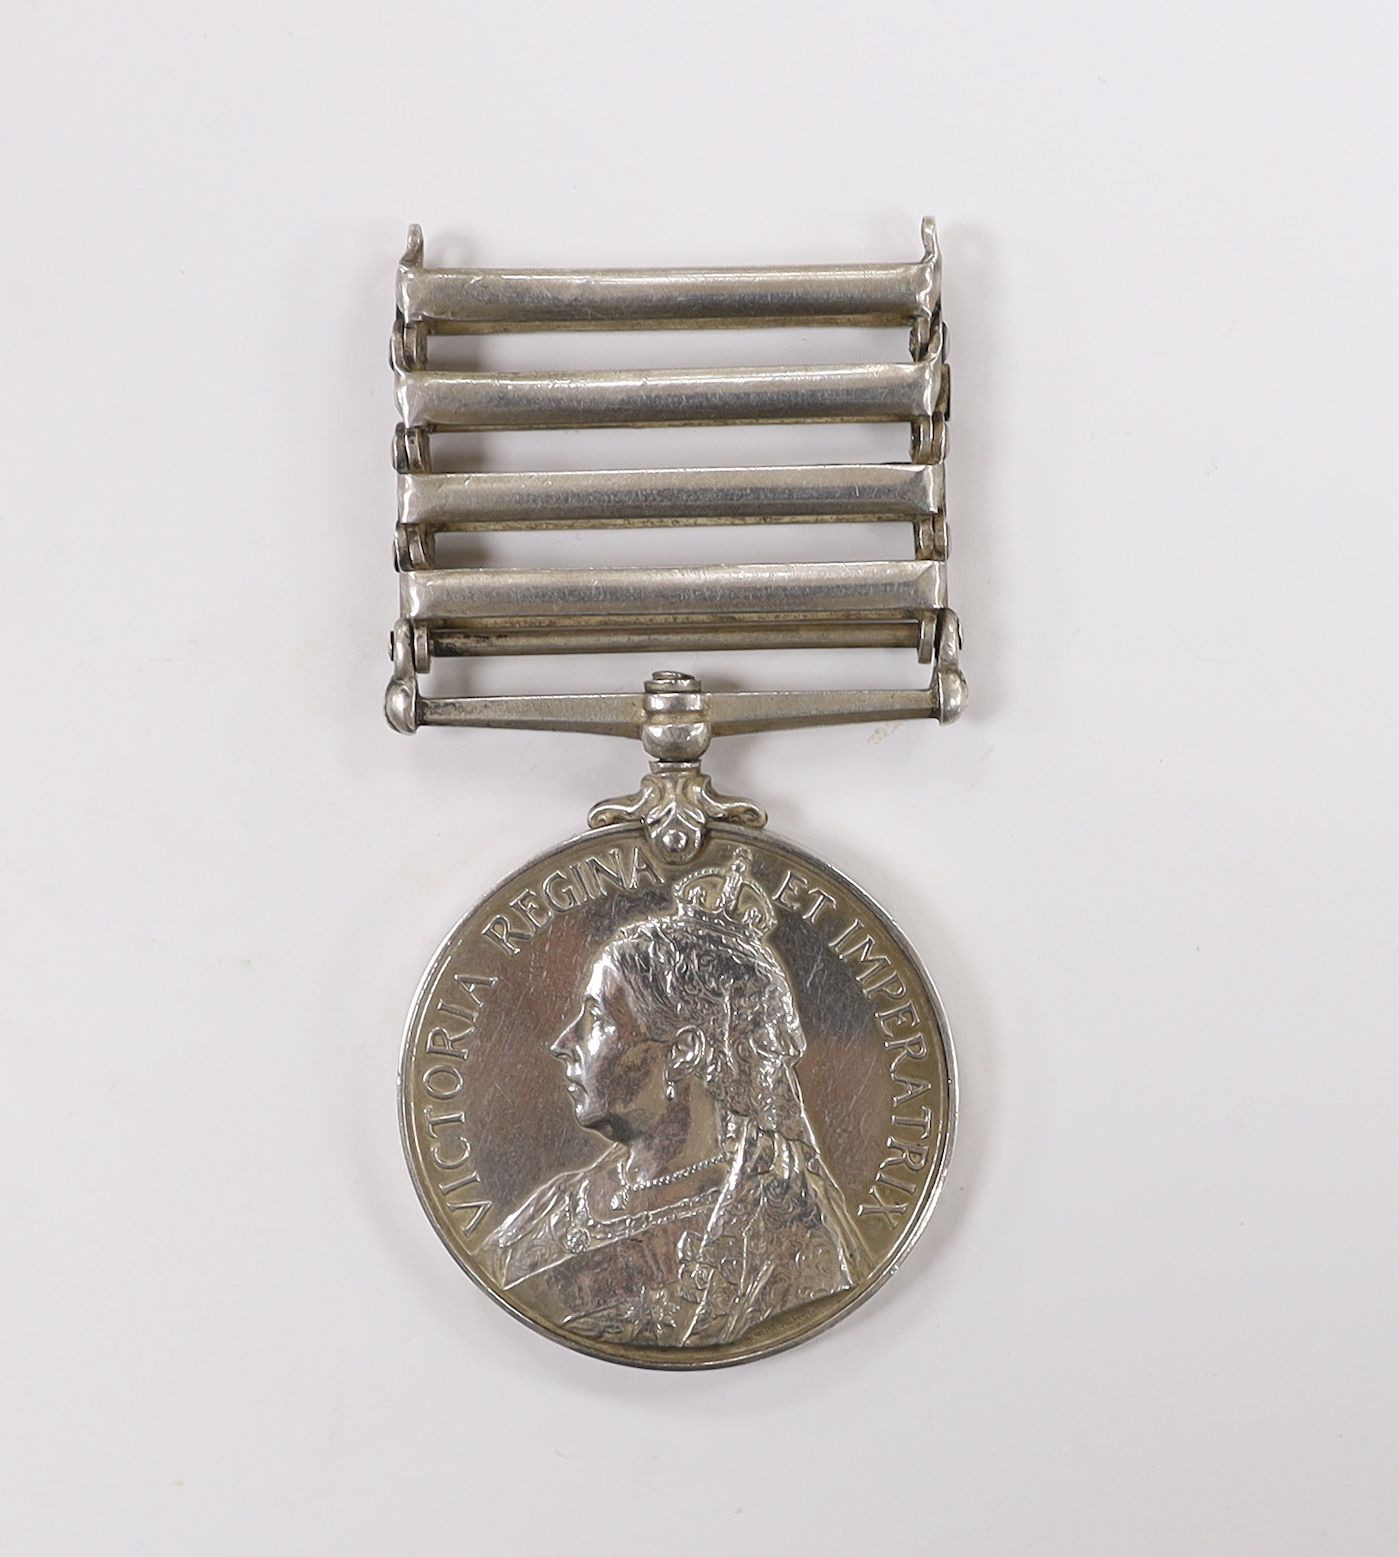 A Queen's South Africa medal to Pte. T. Simpson, Royal Fusiliers, with bars for Cape Colony, Orange Free State, South Africa 1901 and South Africa 1902